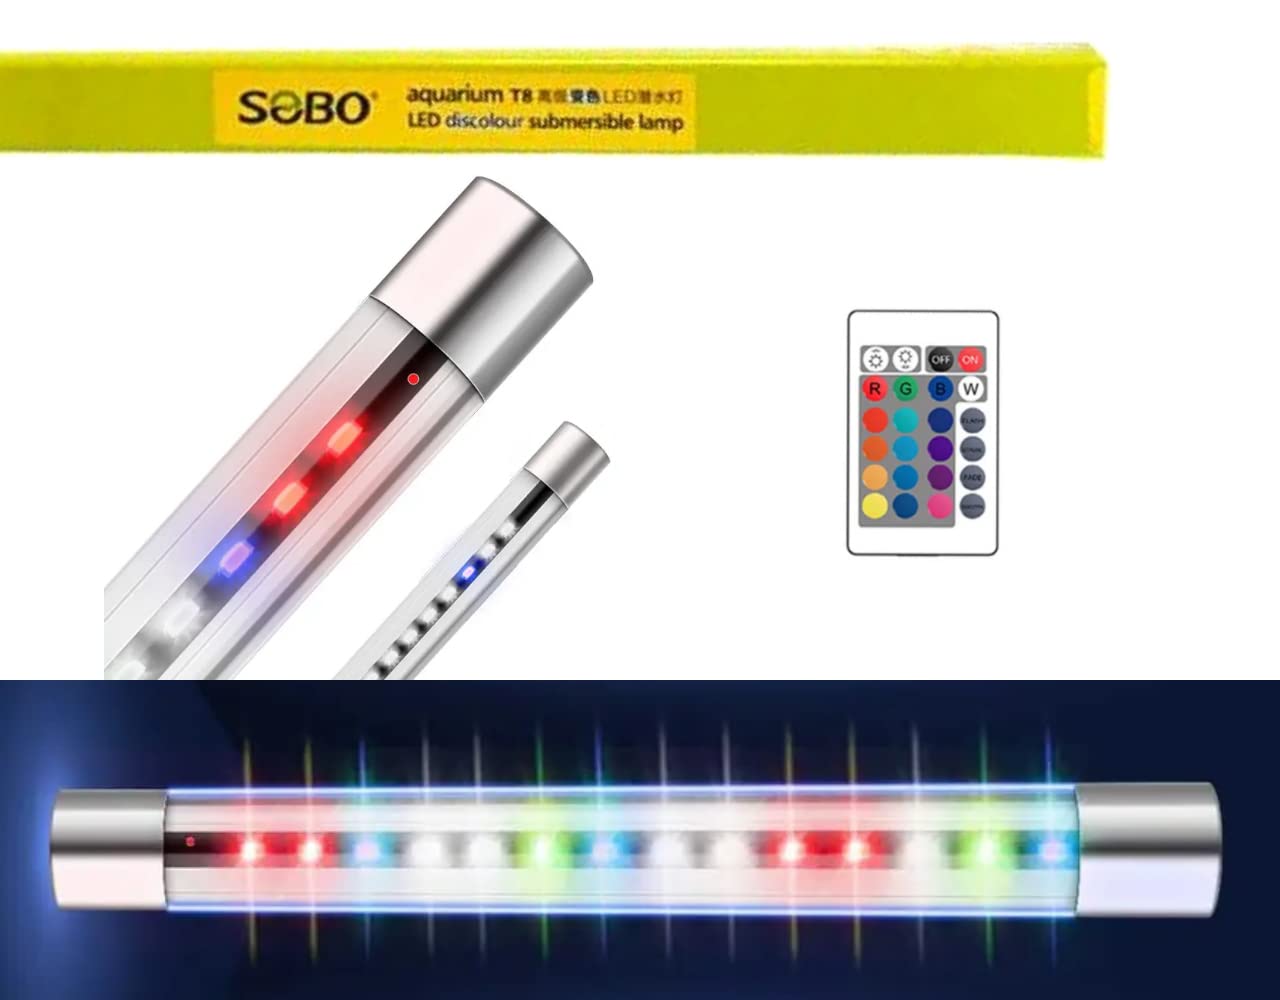 Sobo T4 Series Aquarium Fish Tank Multi Color Change Fully Submersible (Waterproof) LED Lamp with Remote Control & 2 Suction Cups (T4-380 an | Light Length : 350mm)